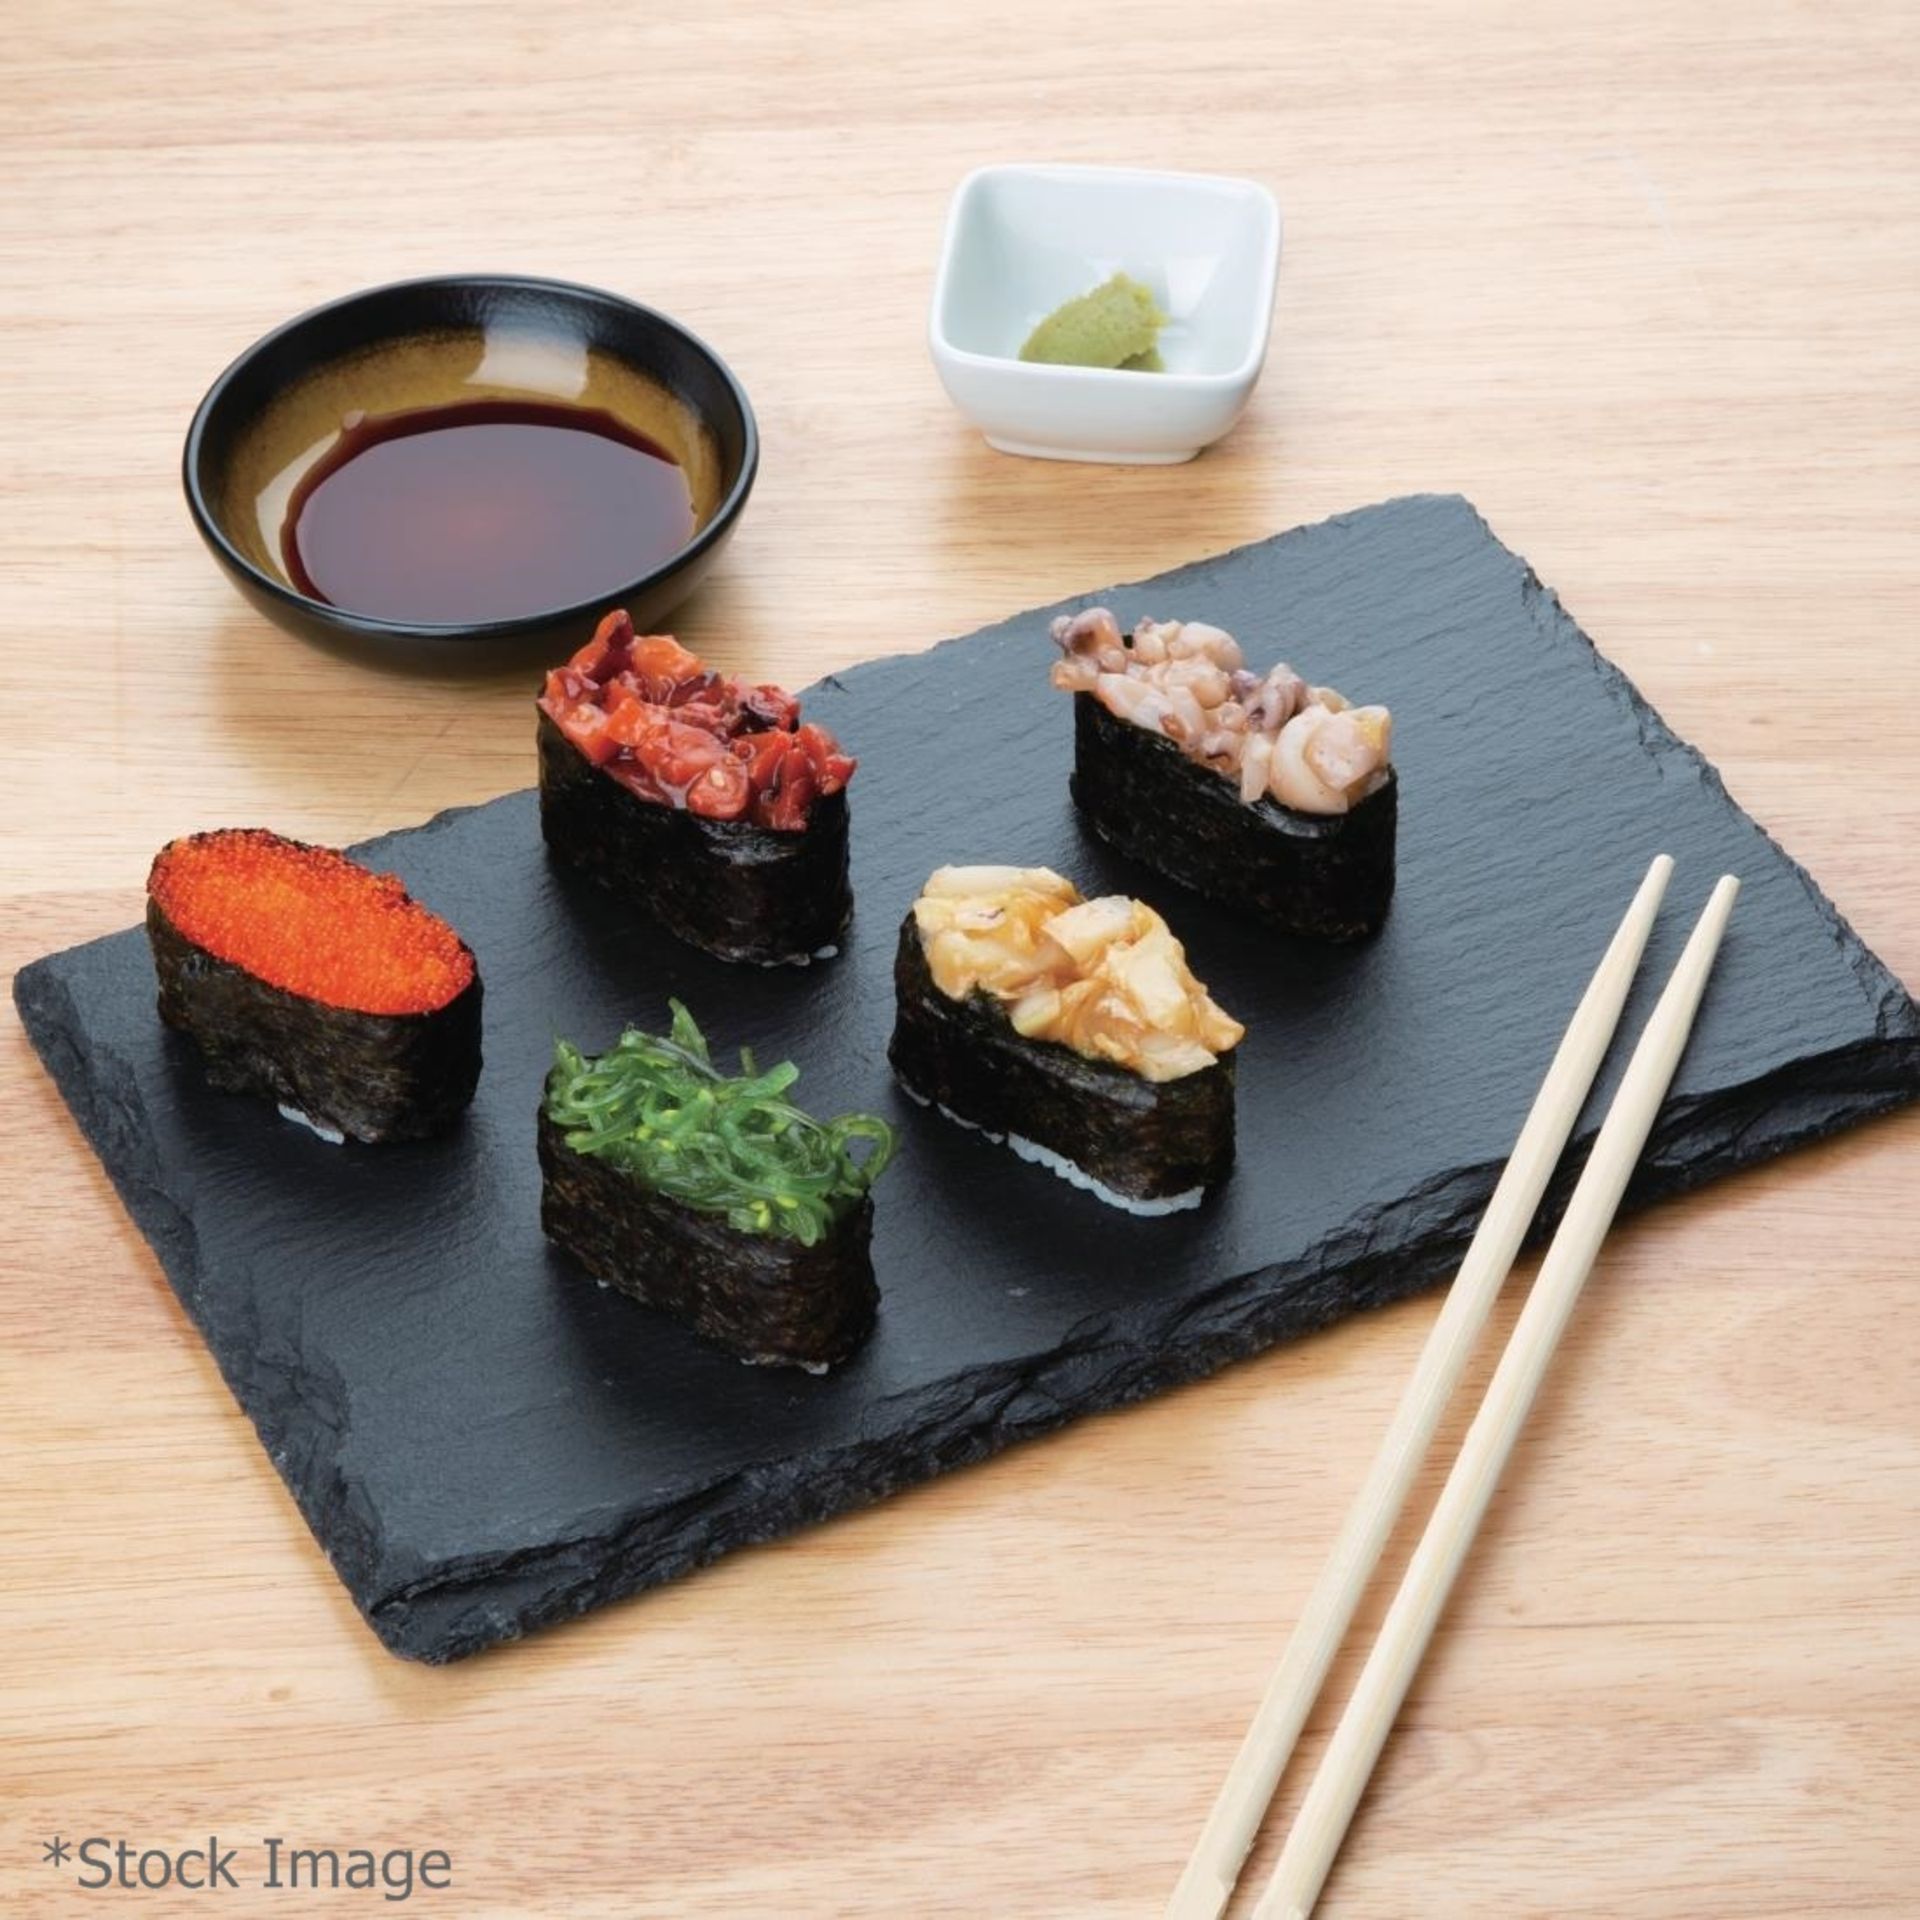 50 x Natural Slate Gastronorm Dining Platters - Dimensions Approx. 32 x 18cm - Recently Removed From